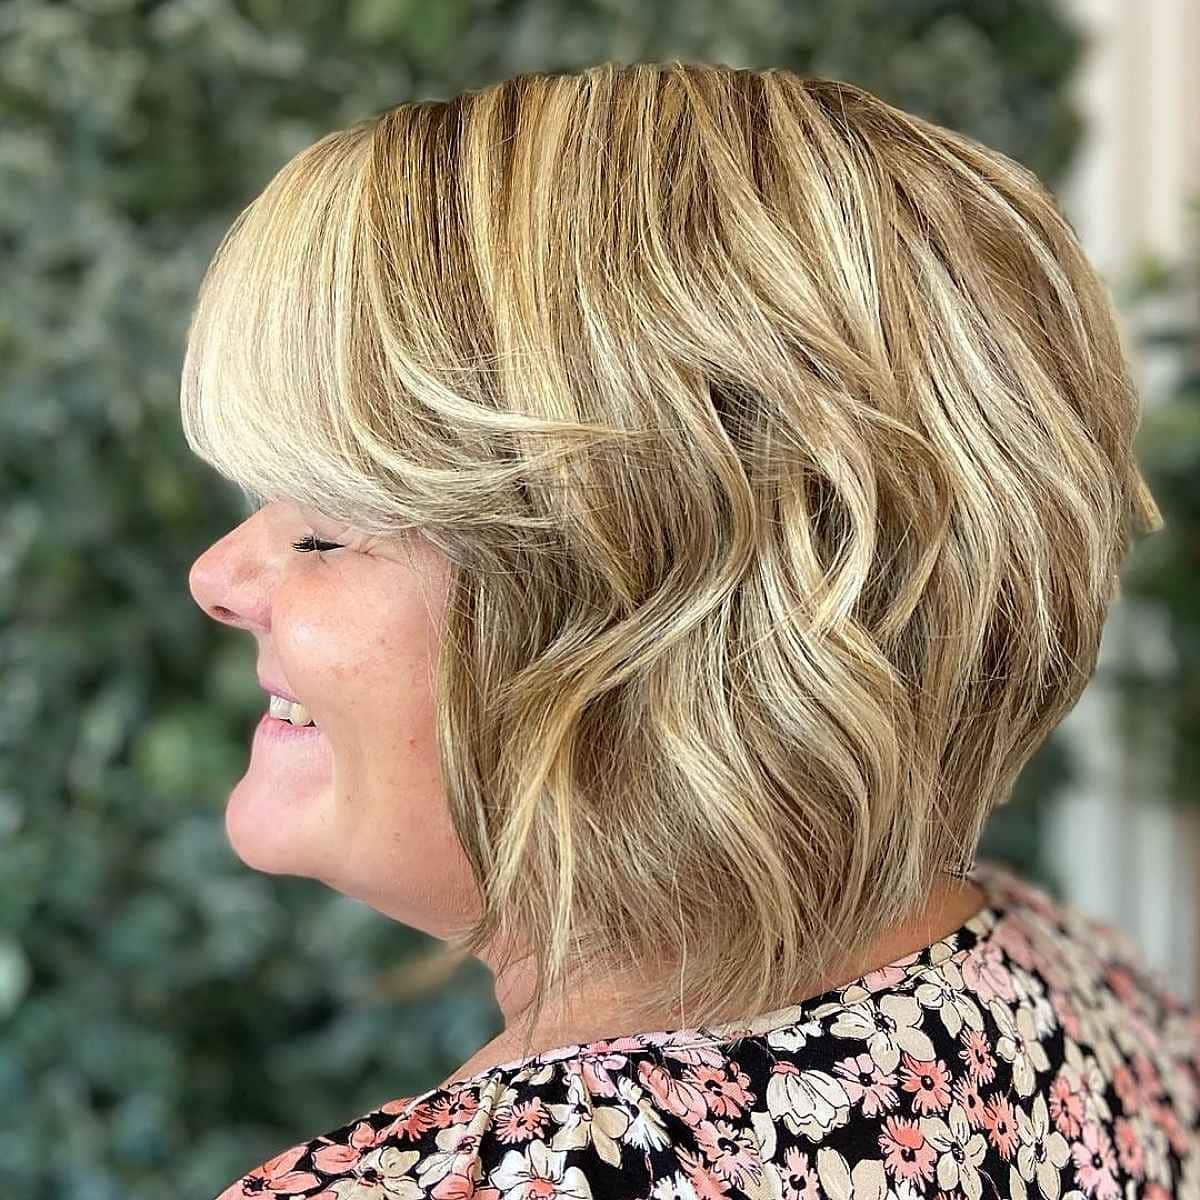 The Best Haircuts and Hairstyles by Monaco Salon in Tampa